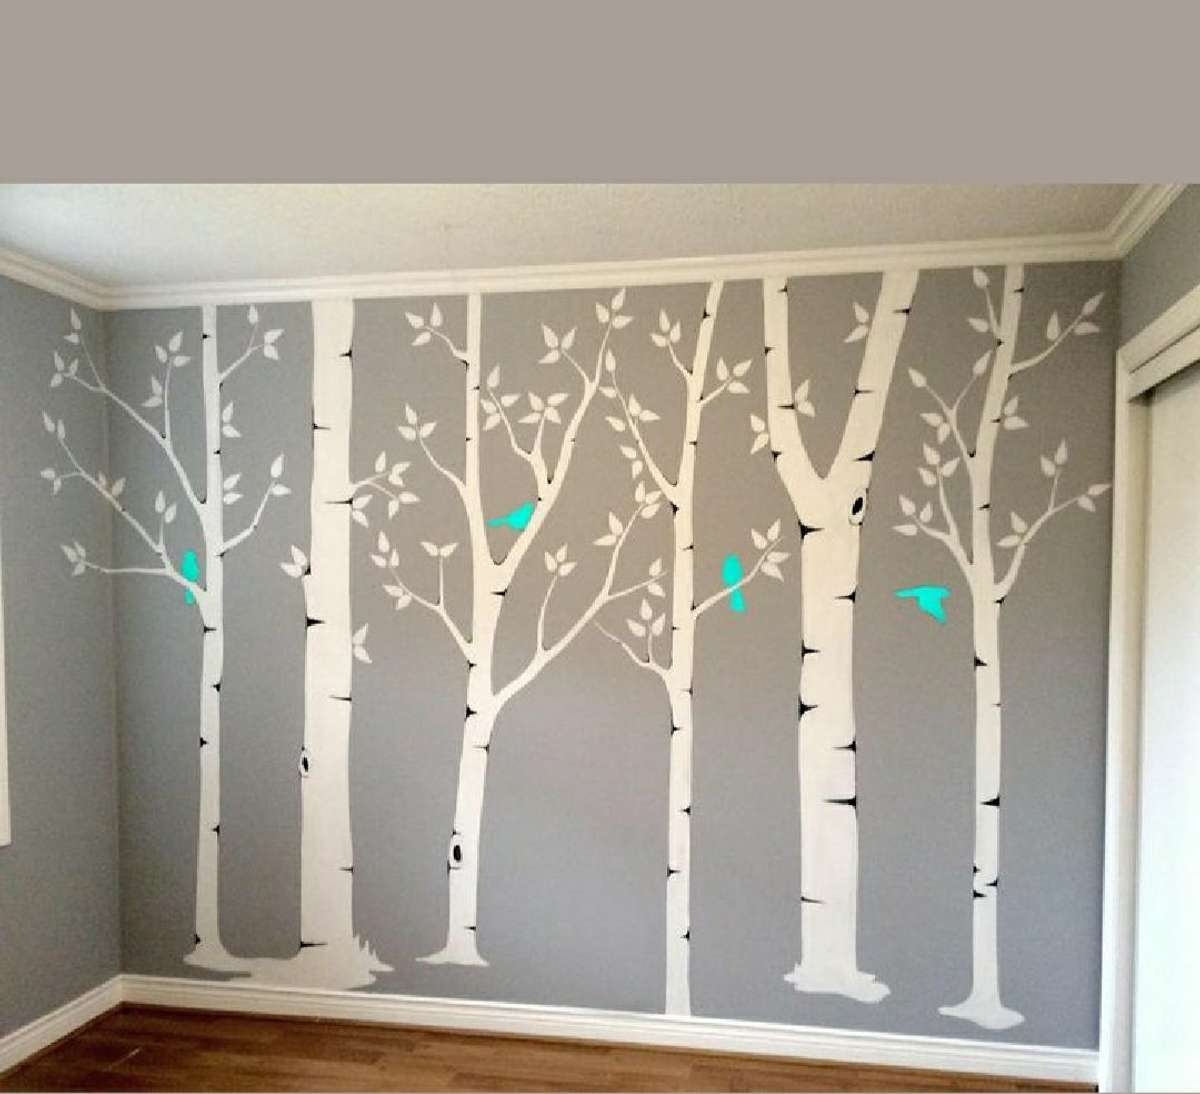 wall painting workðŸ˜�



 #HouseDesigns #HomeAutomation #50LakhHouse #ClosedKitchen #KitchenIdeas #LargeKitchen #KeralaStyleHouse #keralastyle #MrHomeKerala #koloapp #kolopost #HomeAutomation #ElevationHome #HomeDecor